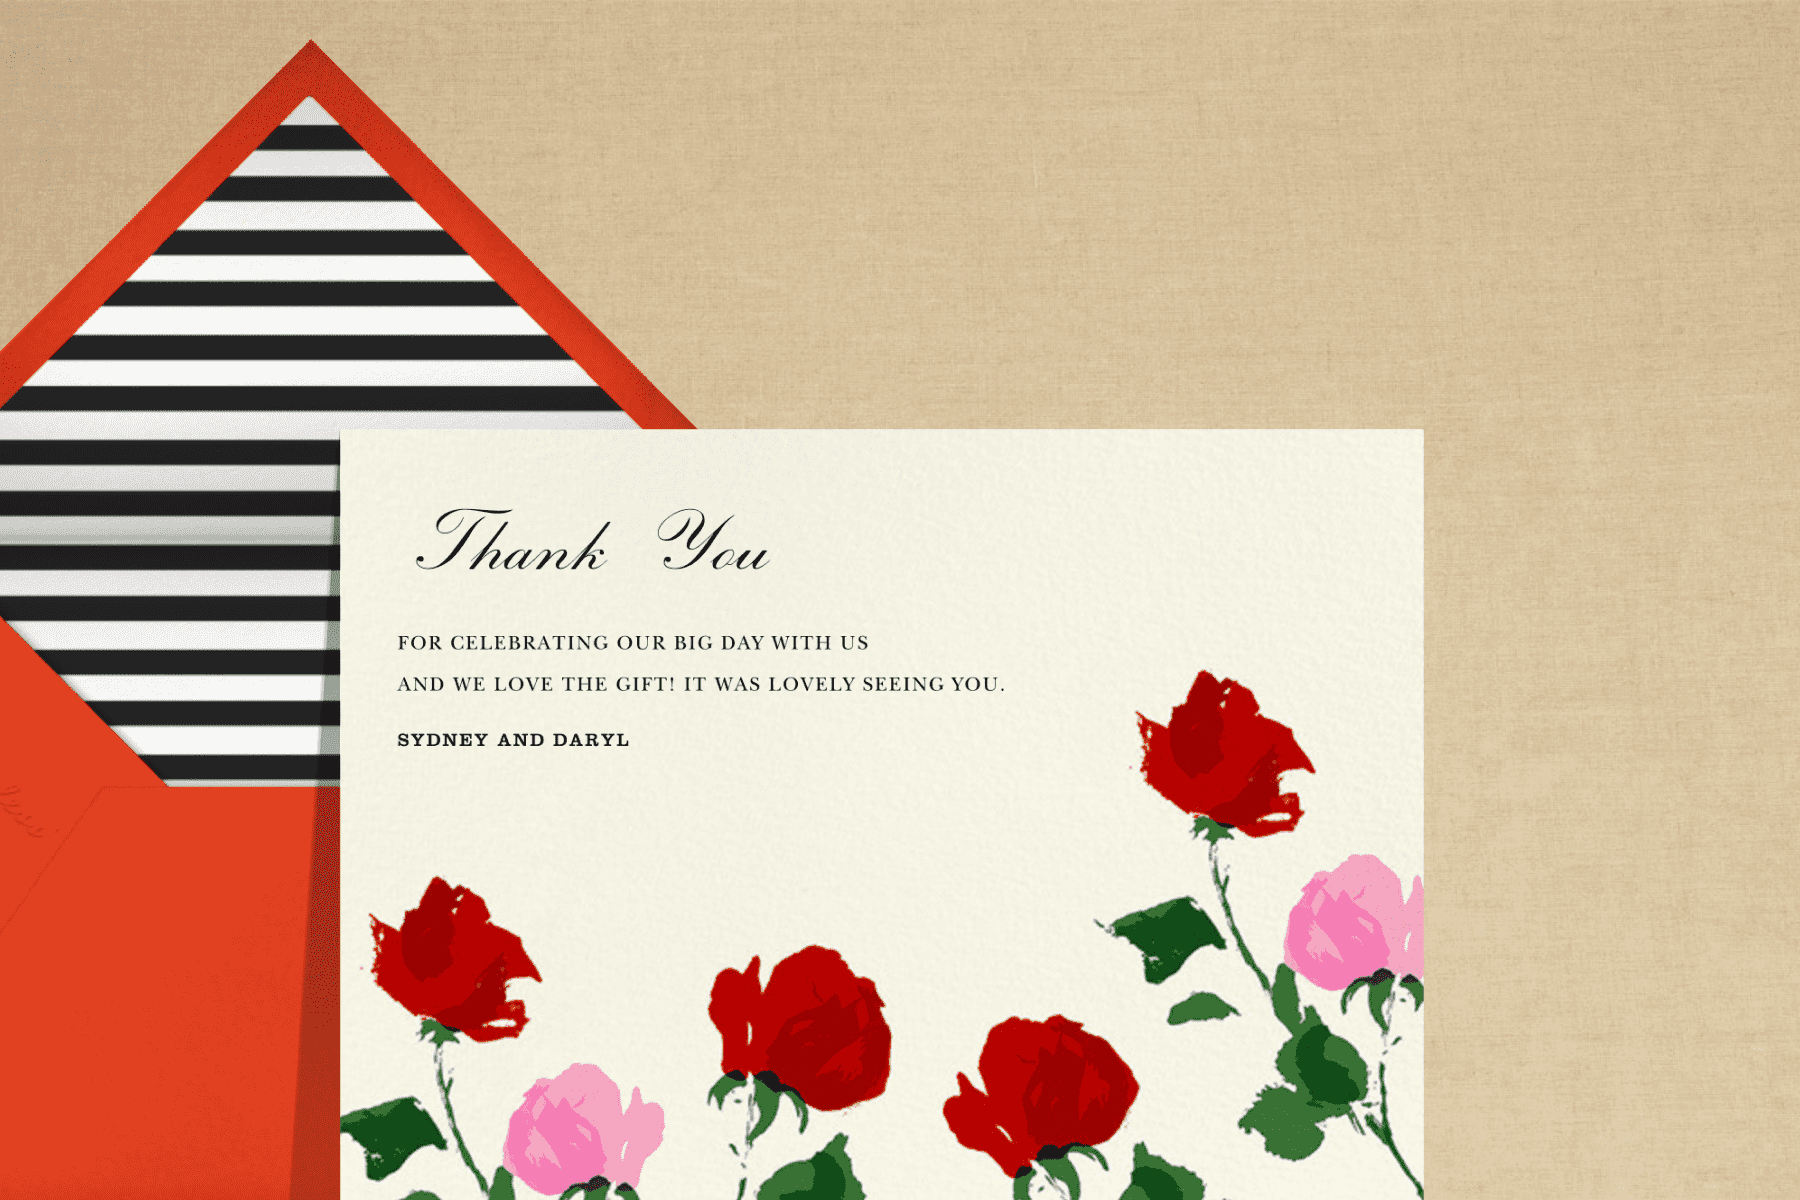 A thank you card with pink and red roses growing from the bottom.